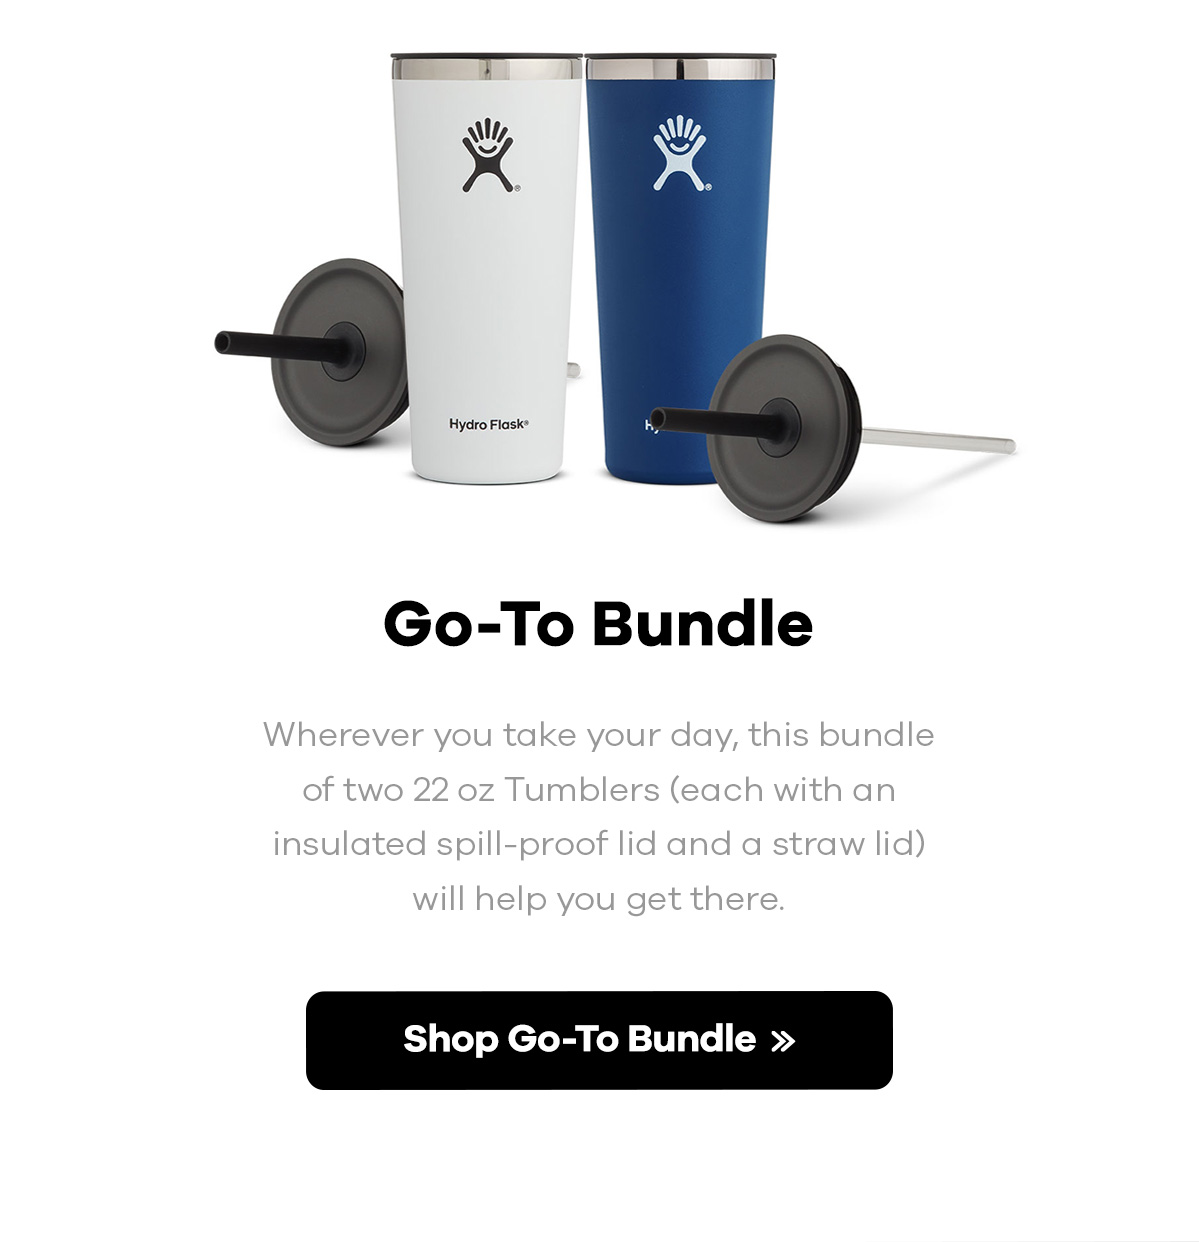 Go-To Bundle | Wherever you take your day, this bundle of two 22 oz Tumblers (each with an insulated spill-proof lid and a straw lid) will help you get there. | Shop Go-To Bundle >>